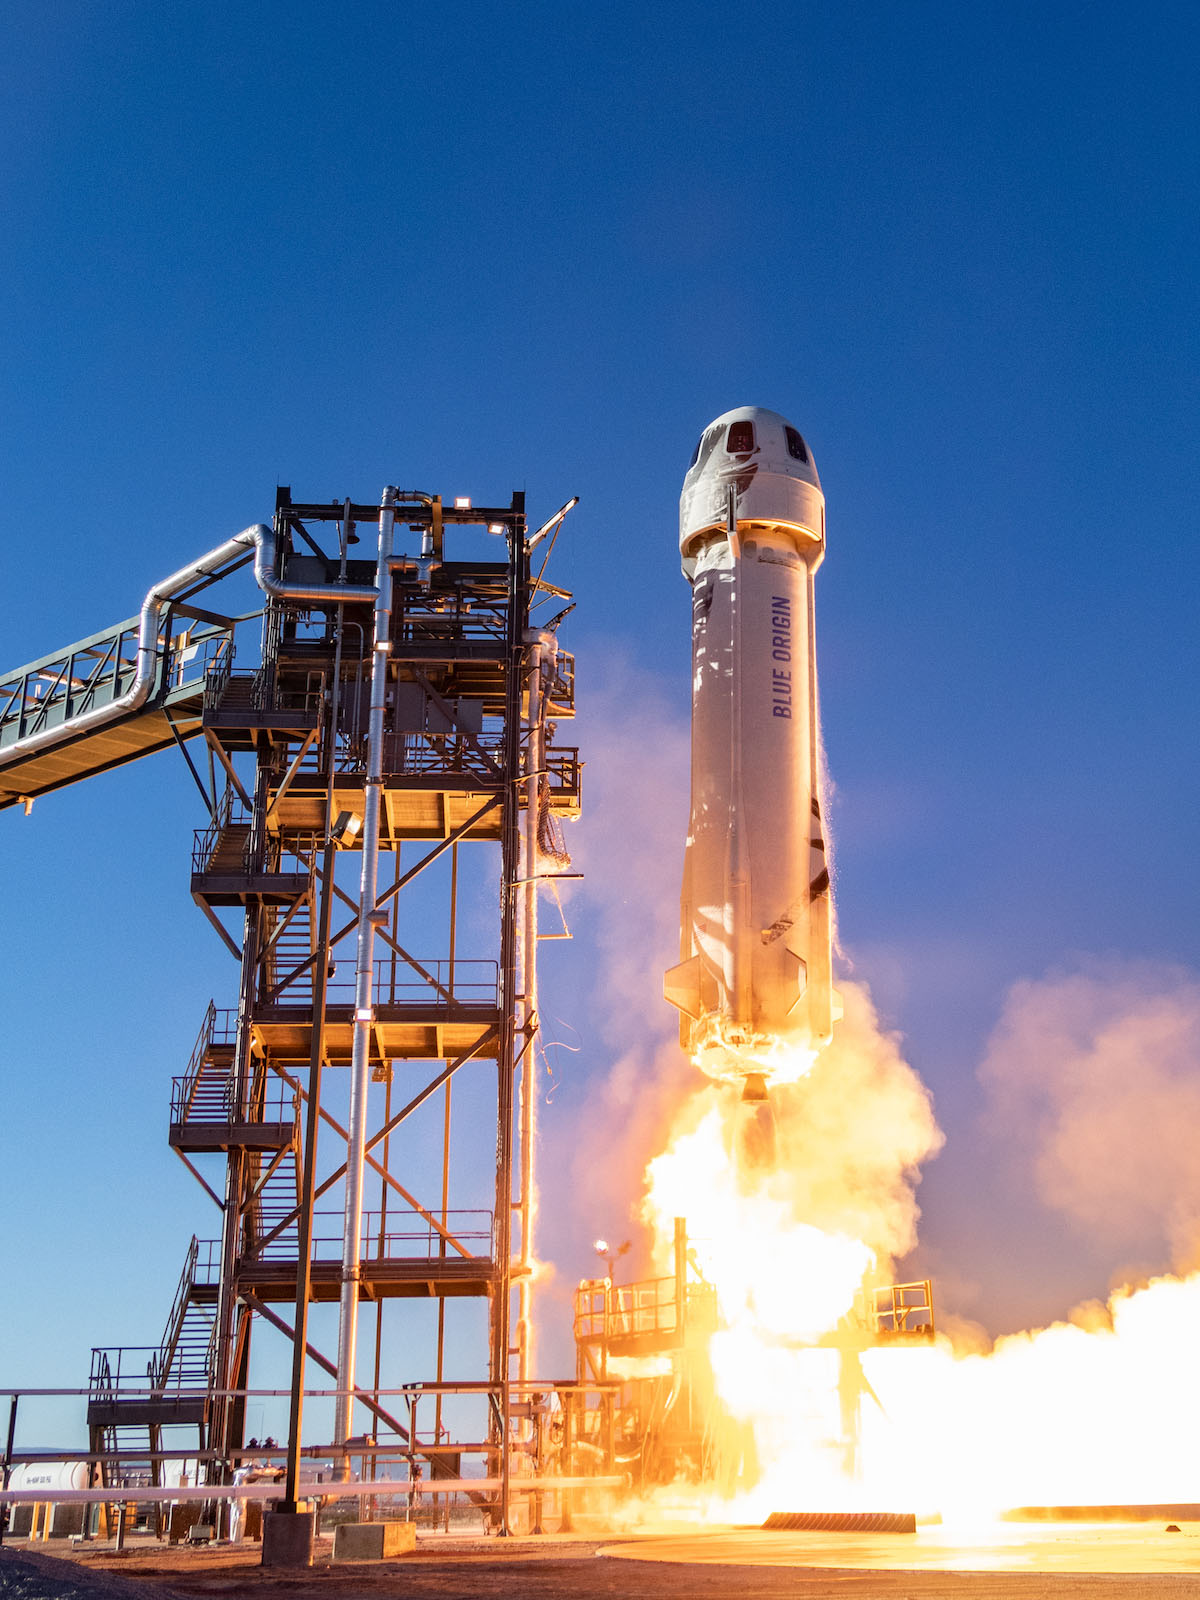 Blue Origin’s New Shepard rocket system lifts off from the company’s launchpad in West Texas in January 2019.